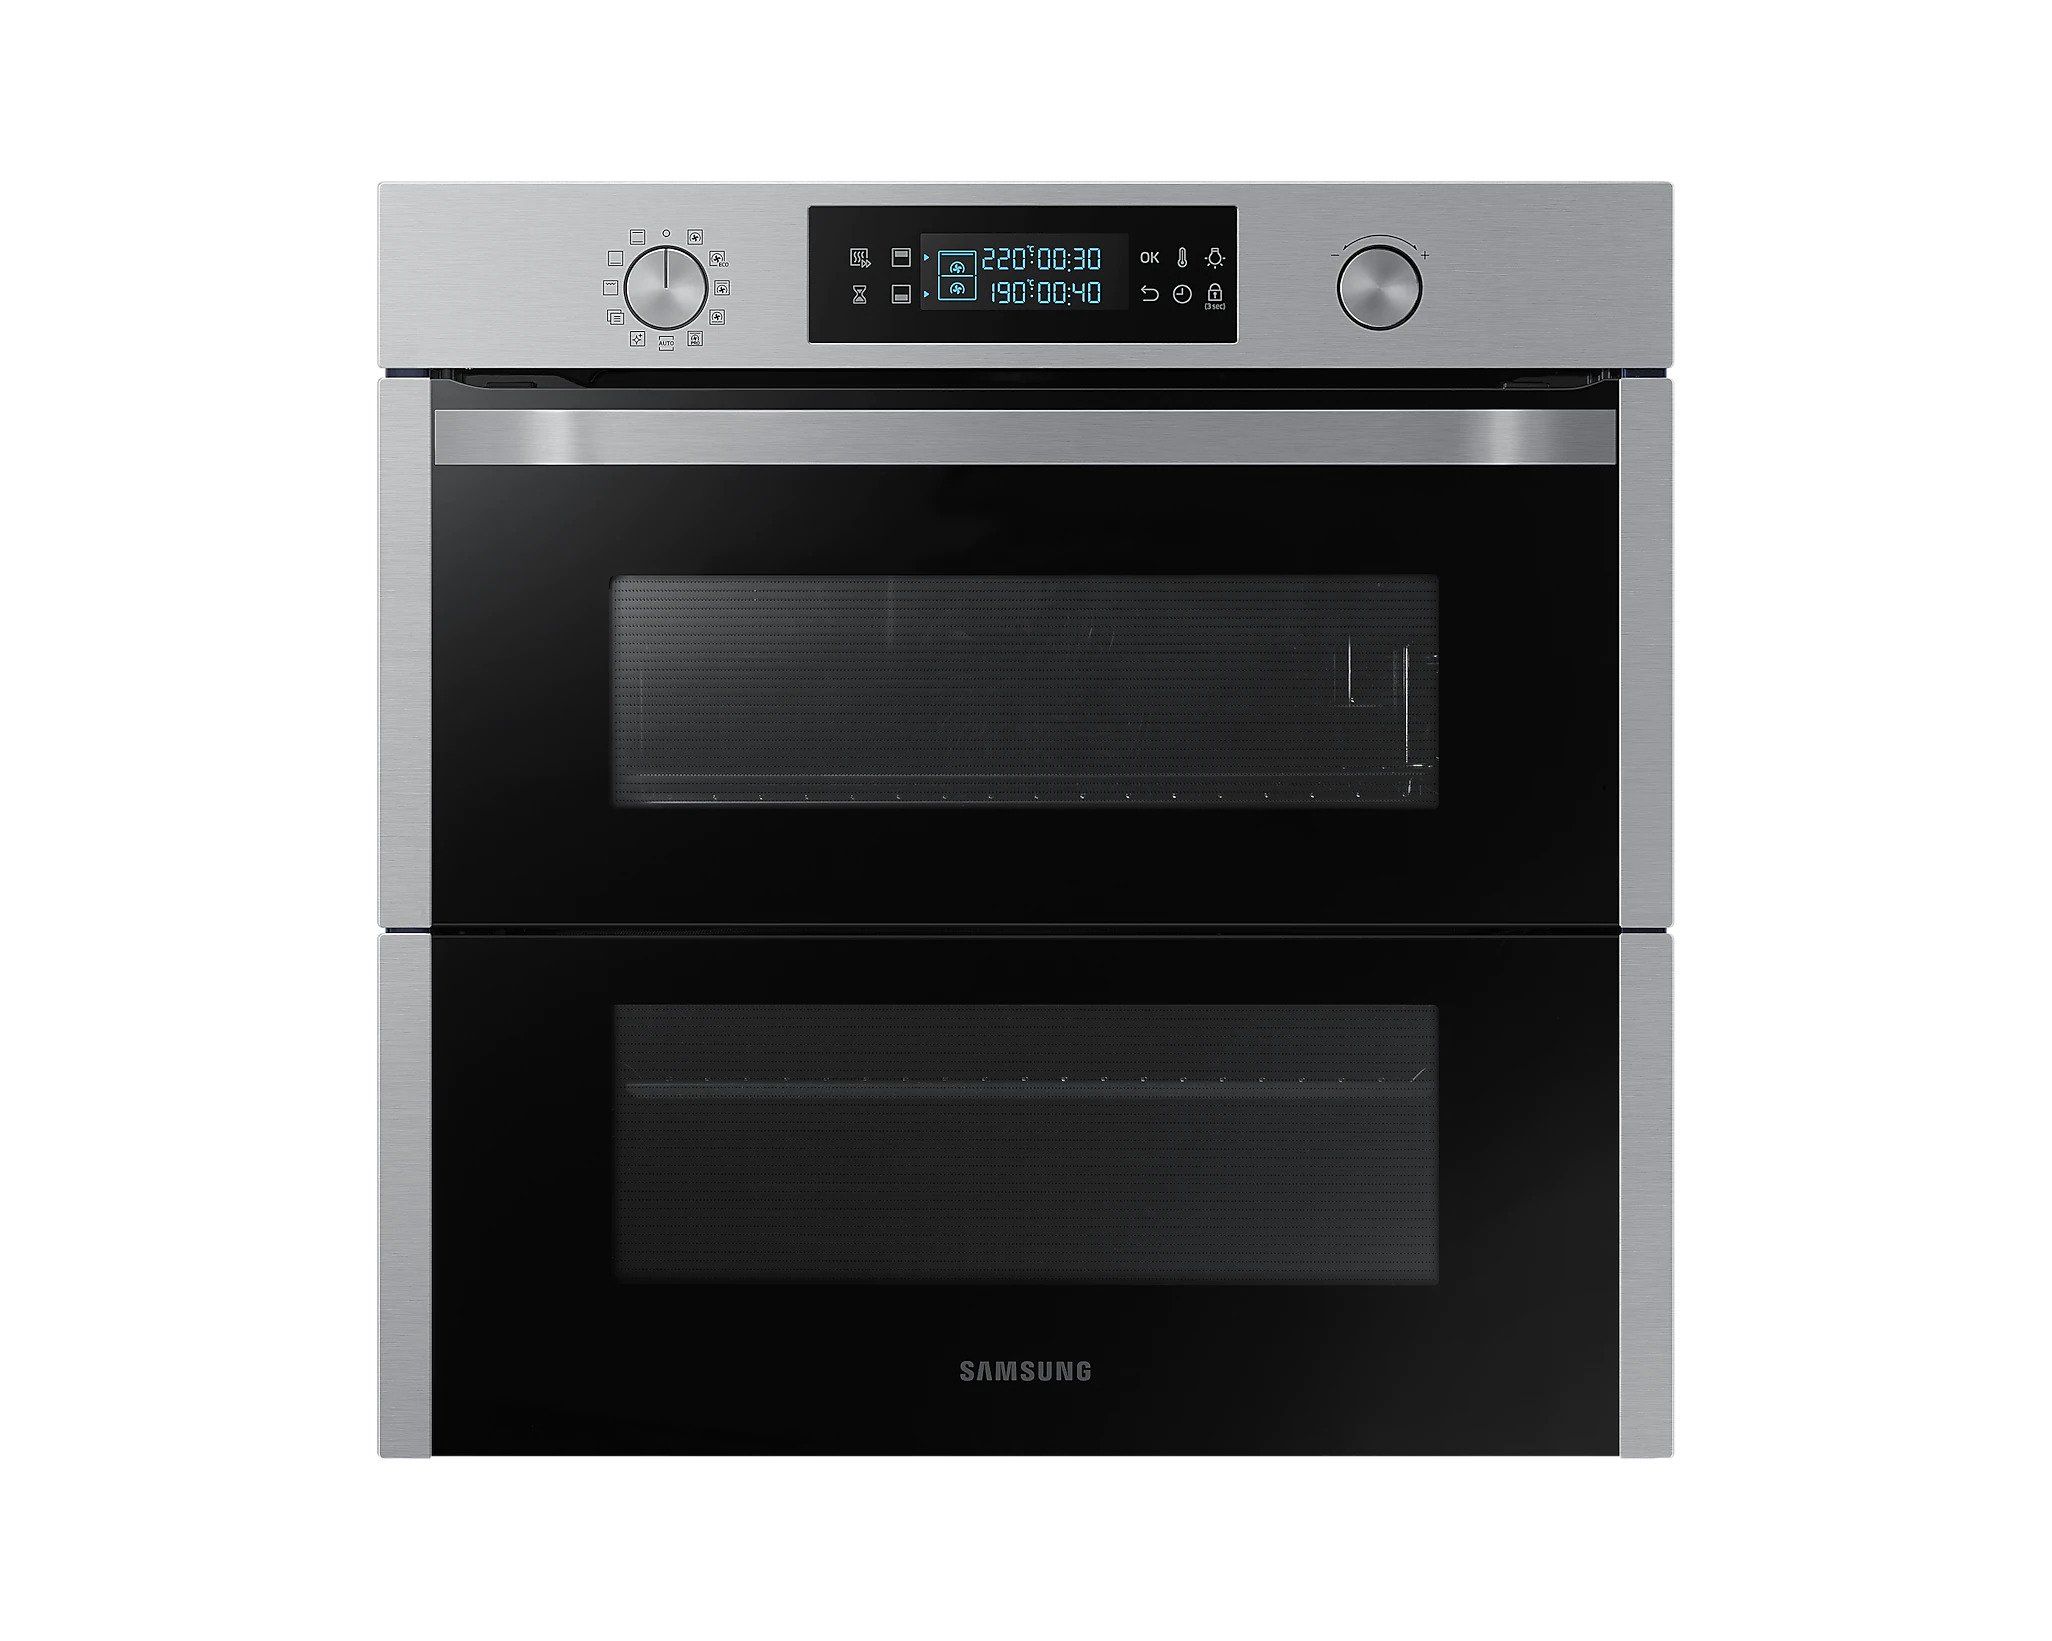 Samsung NV75N5641RS Stainless Steel Dual Cook Flex Oven-1301